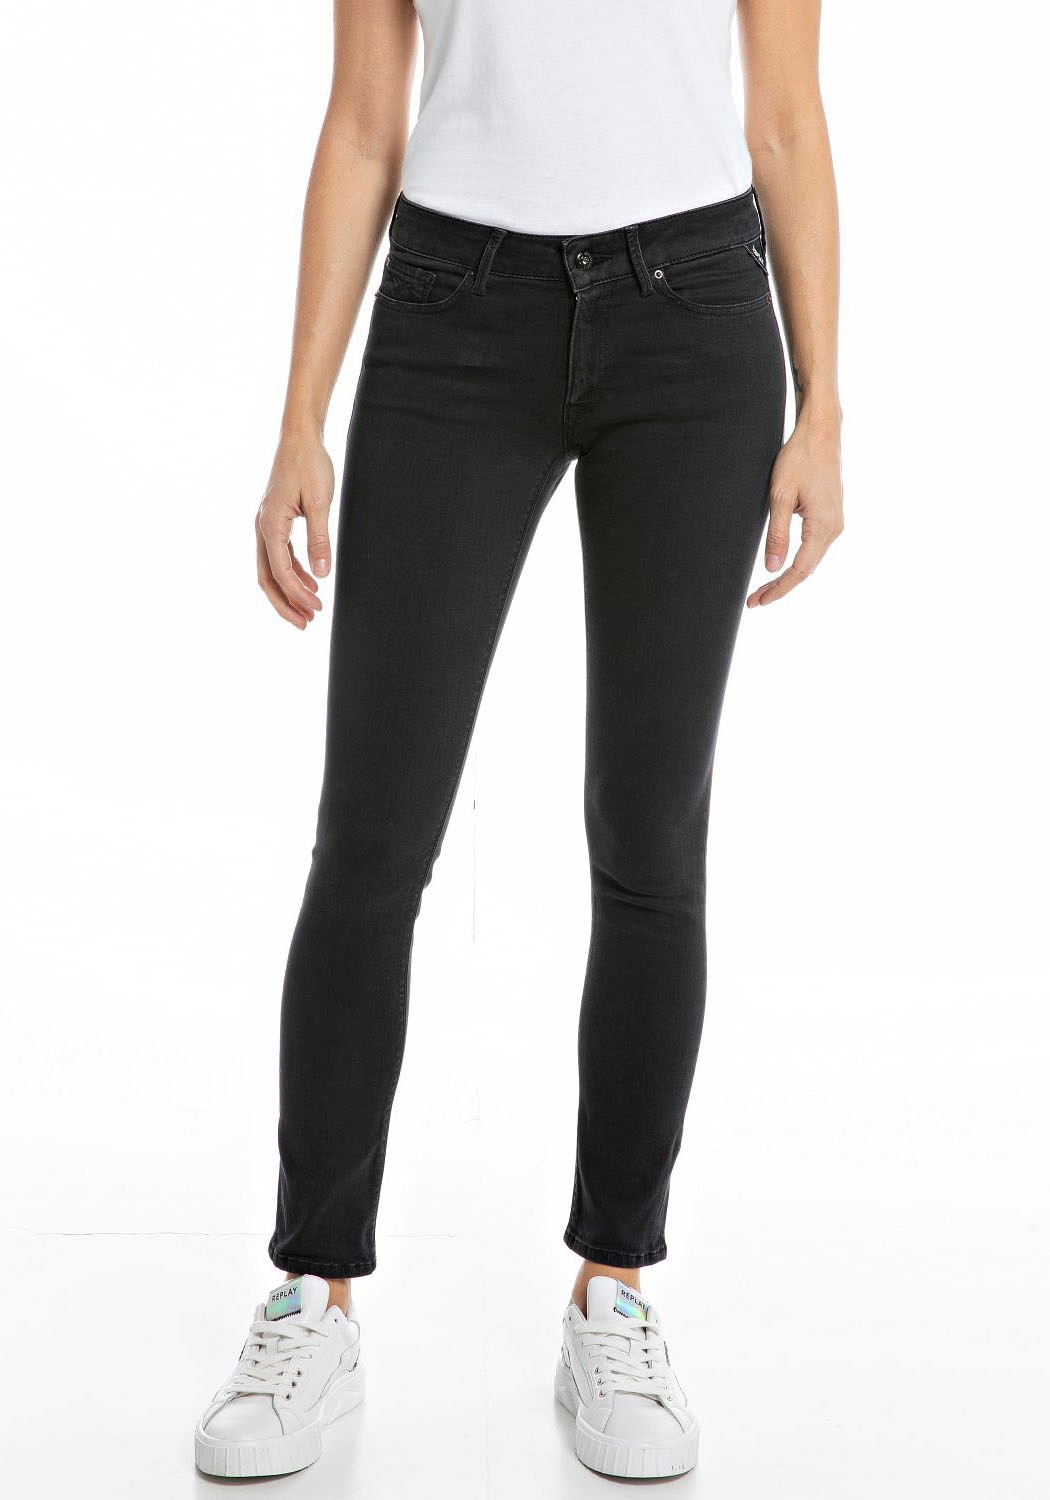 Replay 5-Pocket-Jeans »NEW LUZ«, in Ankle-Länge von Replay